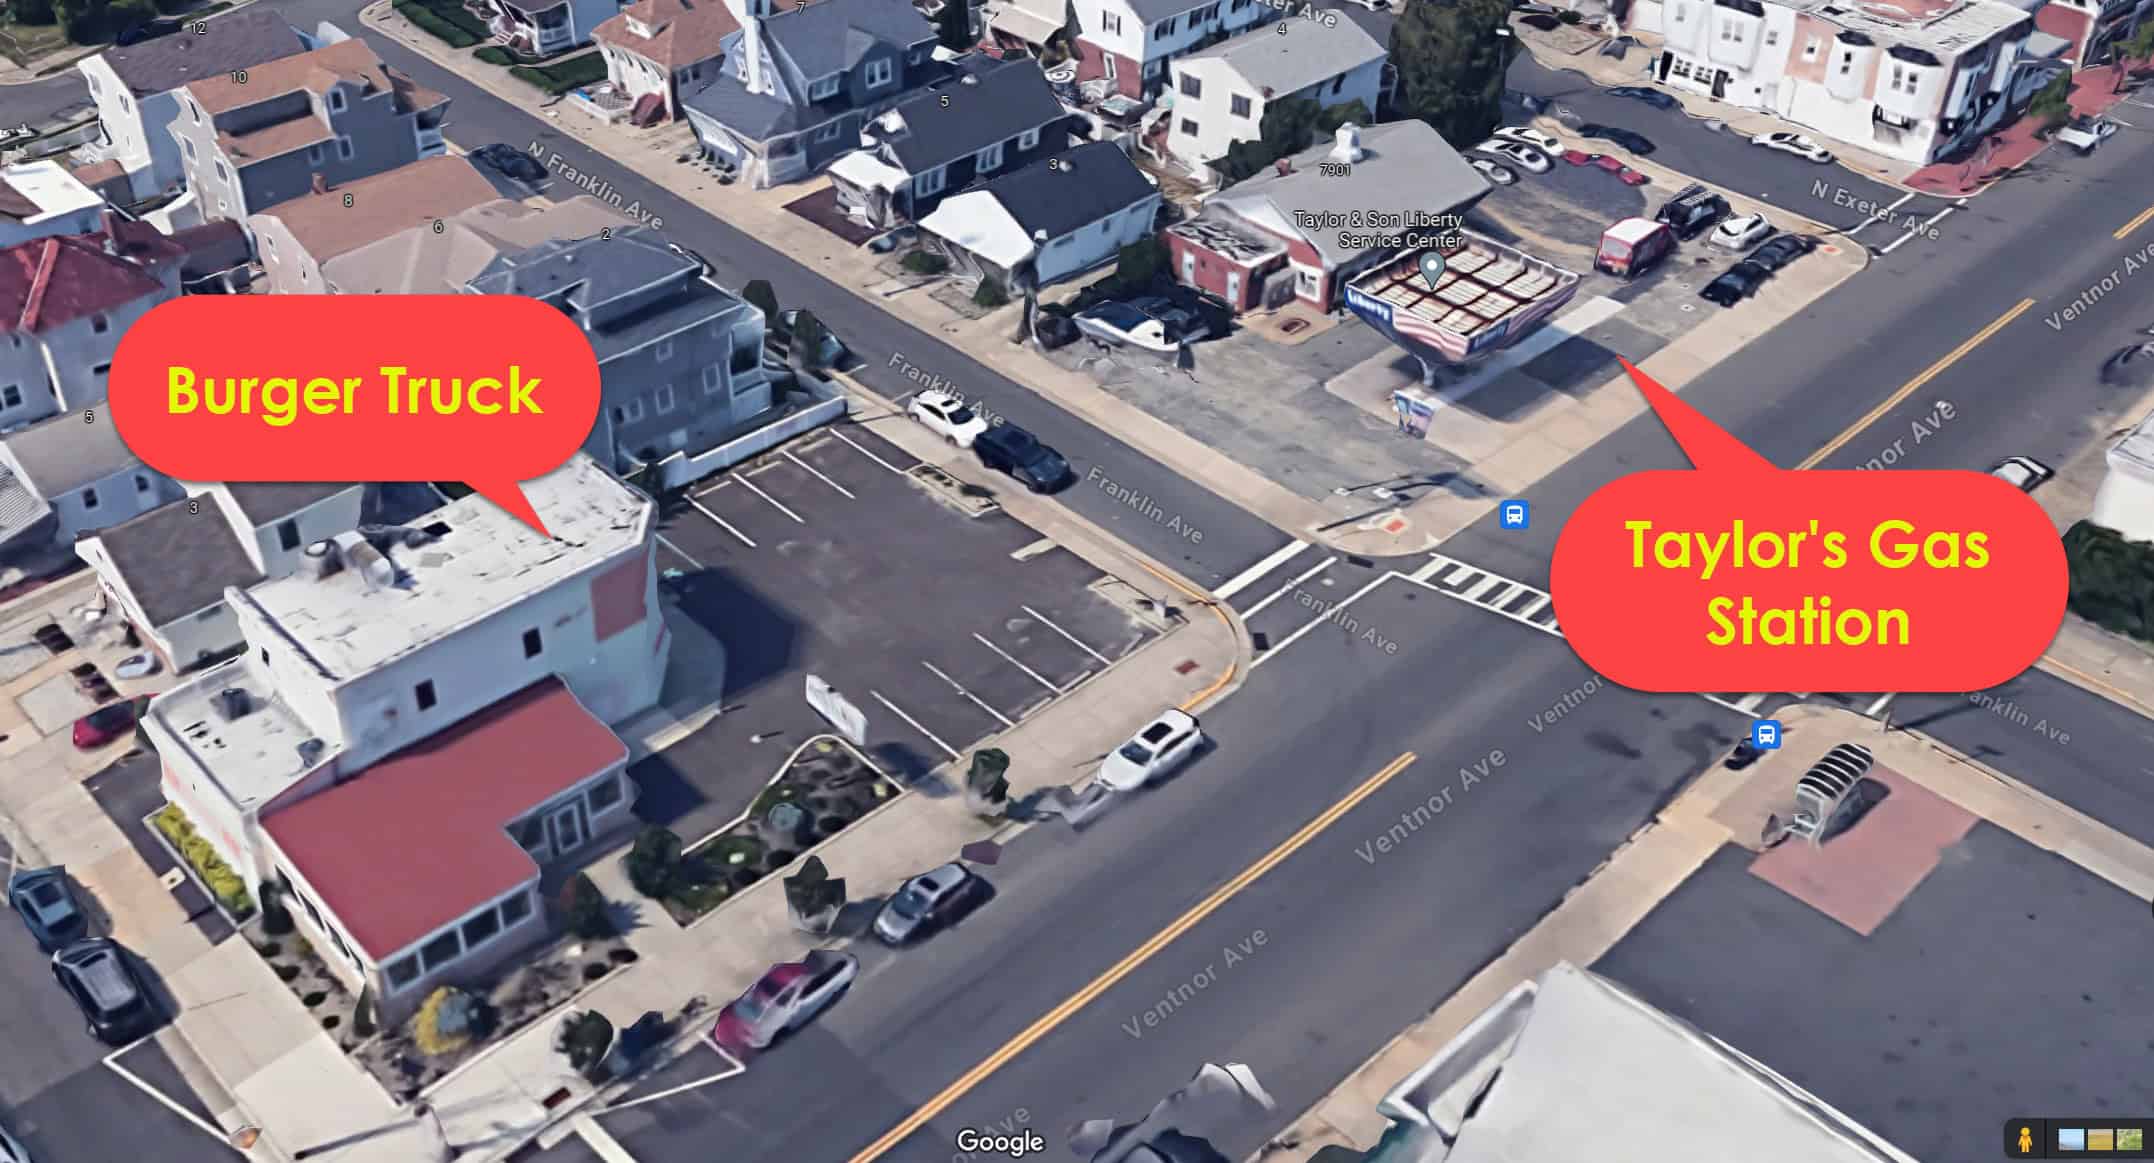 Margate Wants To Buy, Convert Gas Station Into Parking Lot 2 Margate Wants To Buy, Convert Gas Station Into Parking Lot